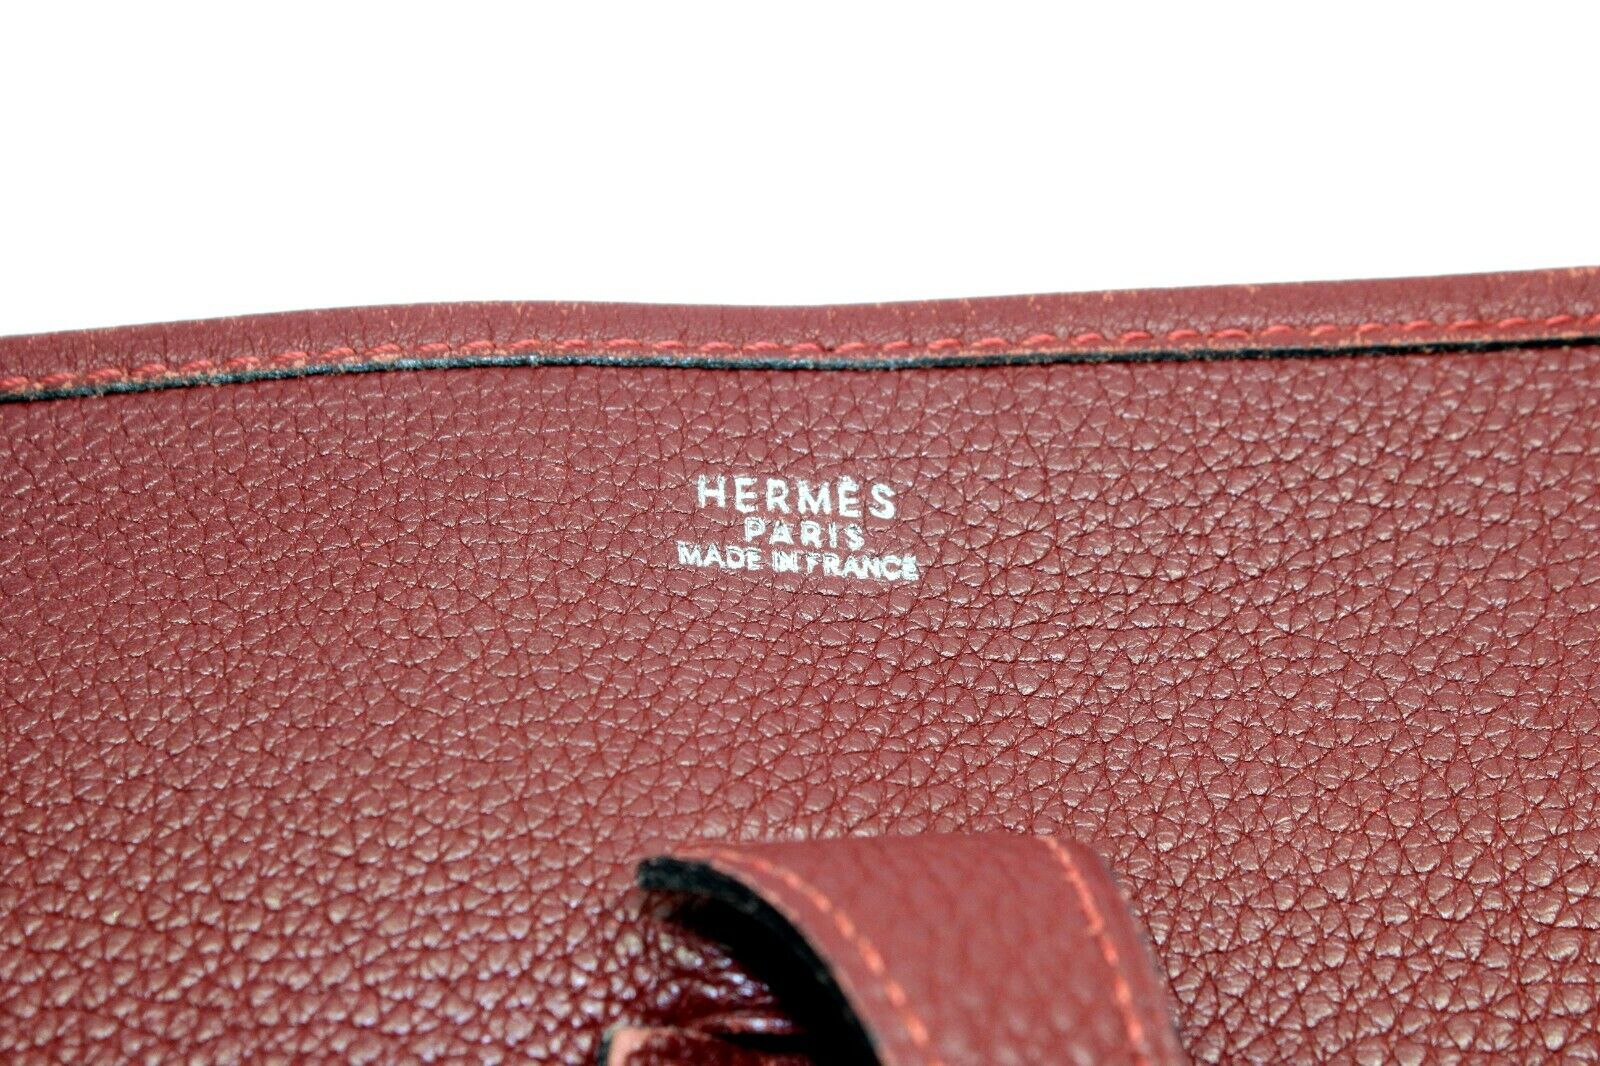 Authentic! Hermes Evelyne Brick Red Clemence Leather PM Handbag Purse